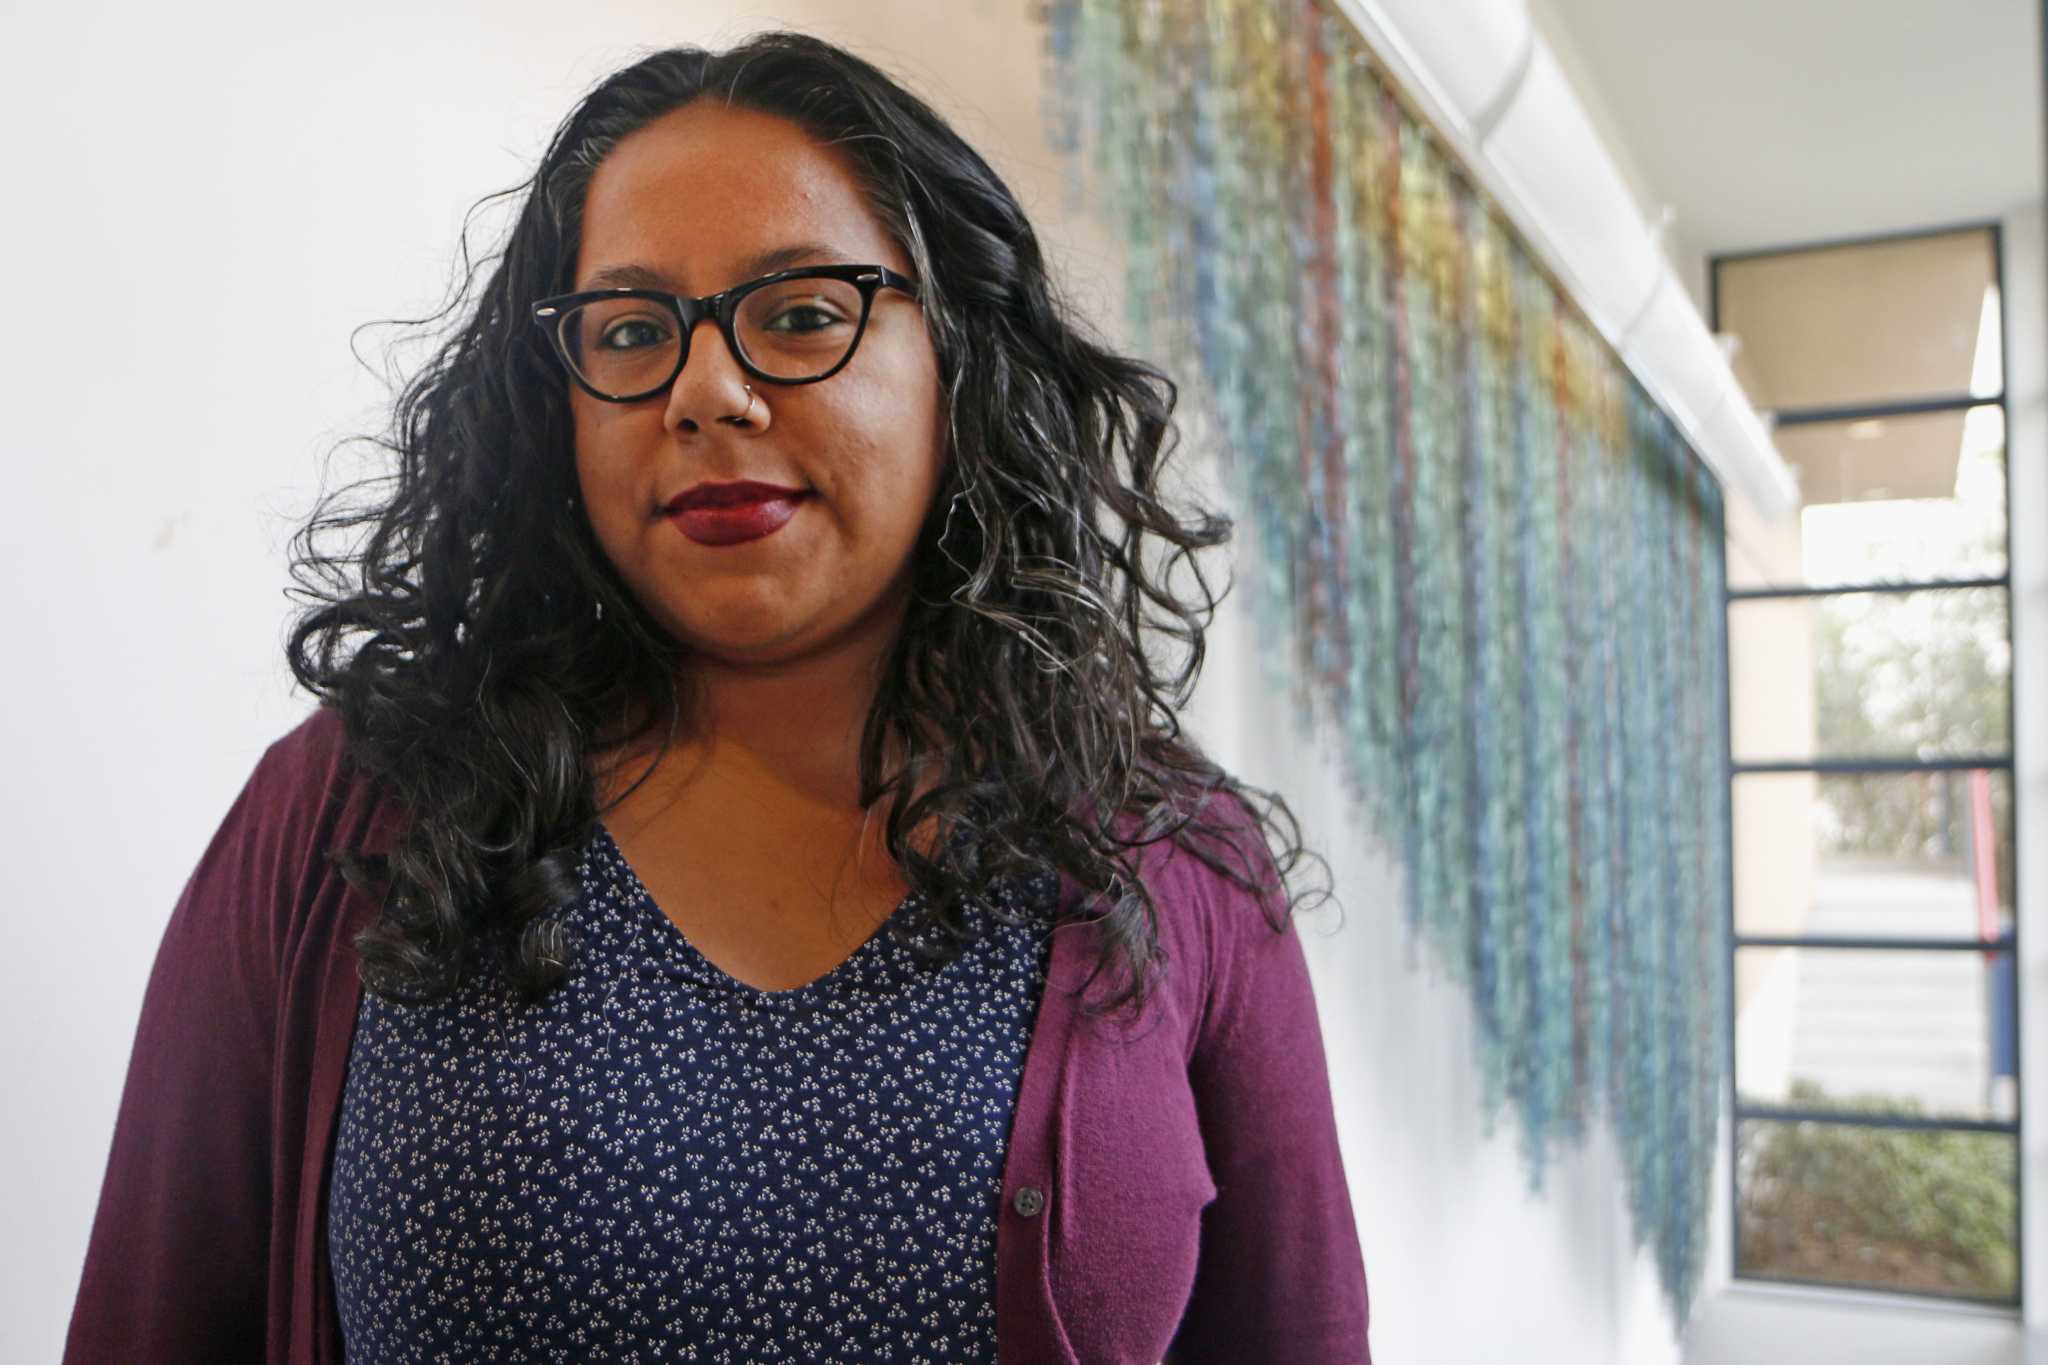 Candy Guinea a SF State graduate student poses for a portrait at SF State on

Tuesday, Dec. 6 2016. Guinea has received the 2016 Princess Grace Award for her films

that provide commentary on social justice. (Photo: Connor Hunt/Xpress)